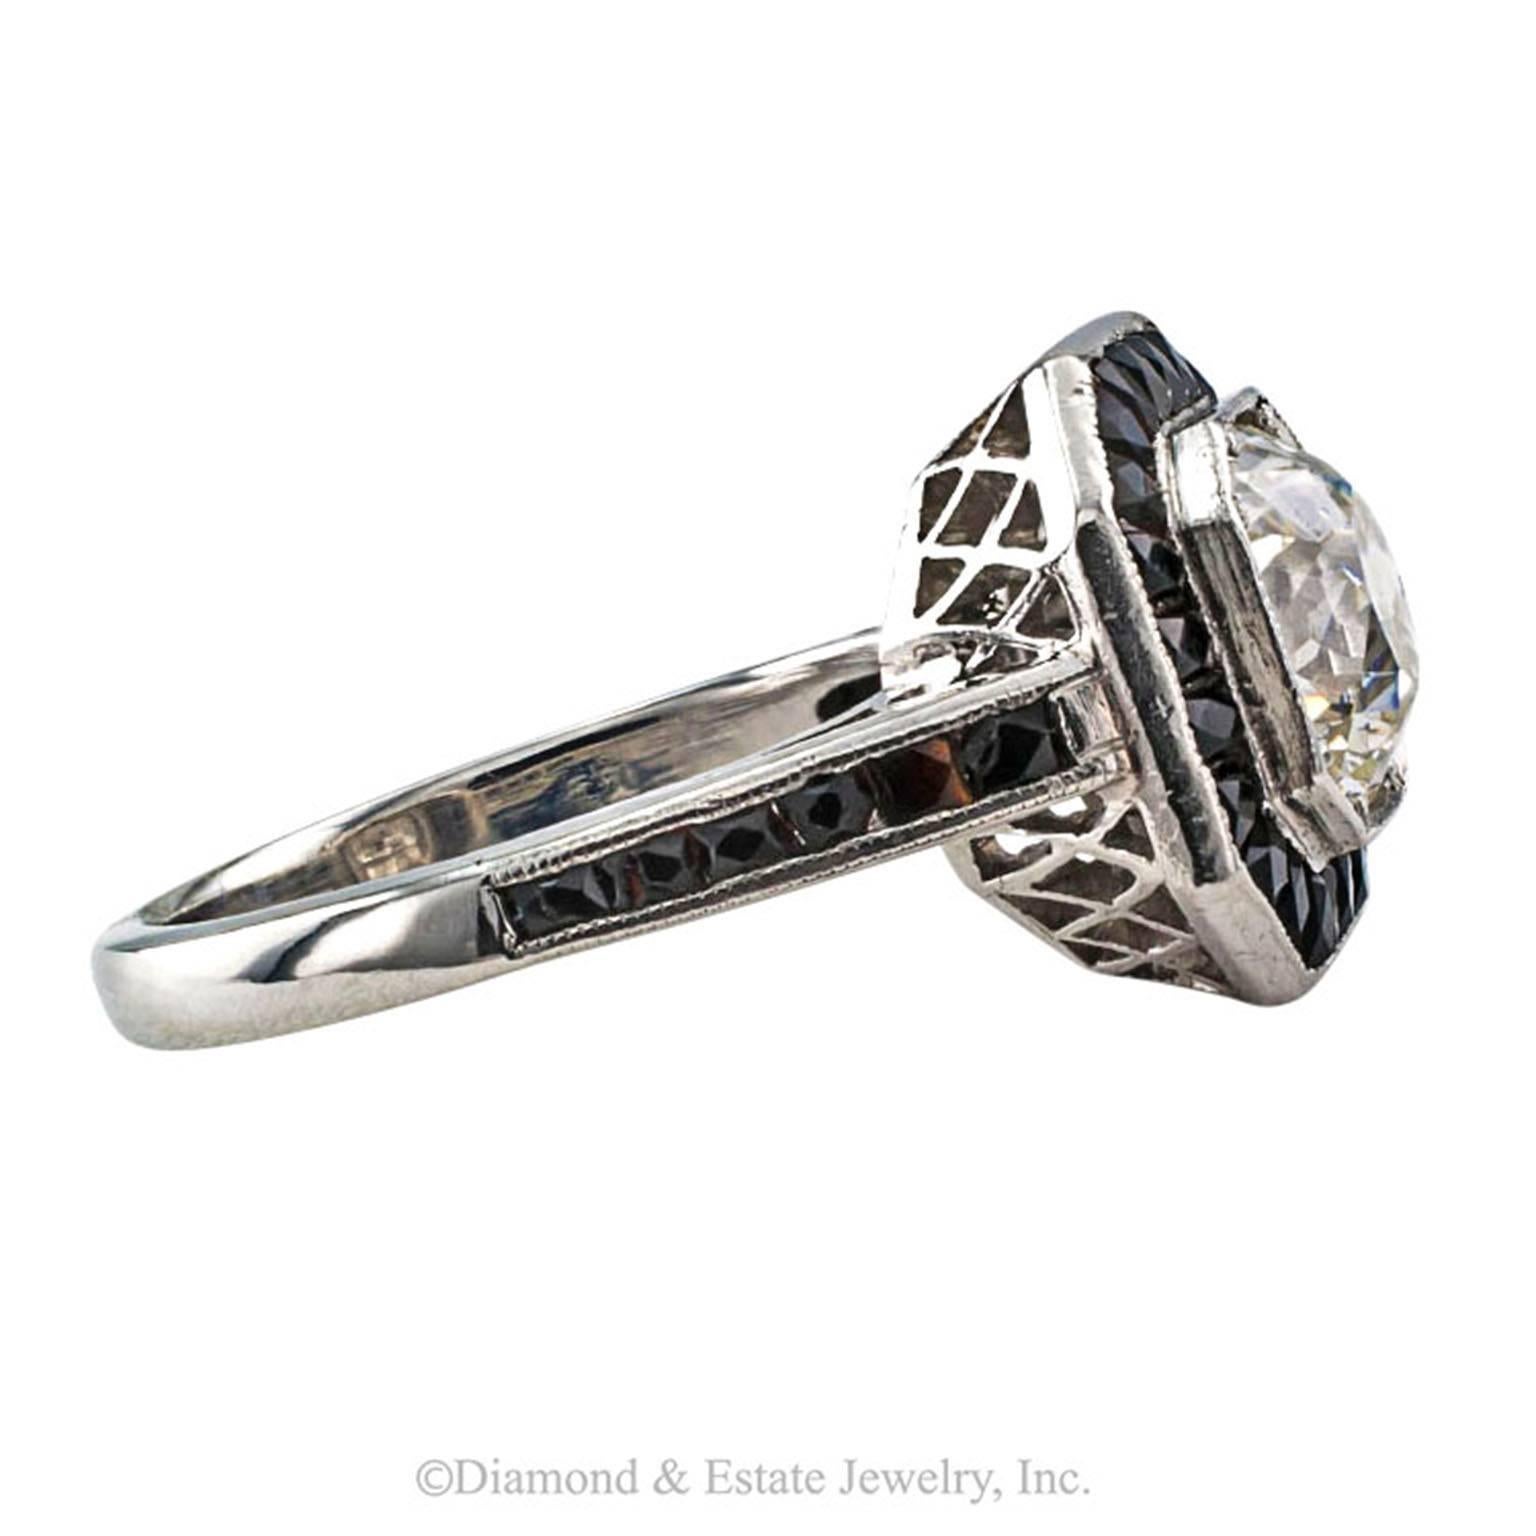 1.85 Carats Old Mine Cushion Cut Diamond and Black Onyx Engagement Ring

Undeniably gratifying, eye candy... the big rock in the middle!  The awe-inspiring Art Deco style inspired platinum mount centers upon an old mine cushion-cut diamond